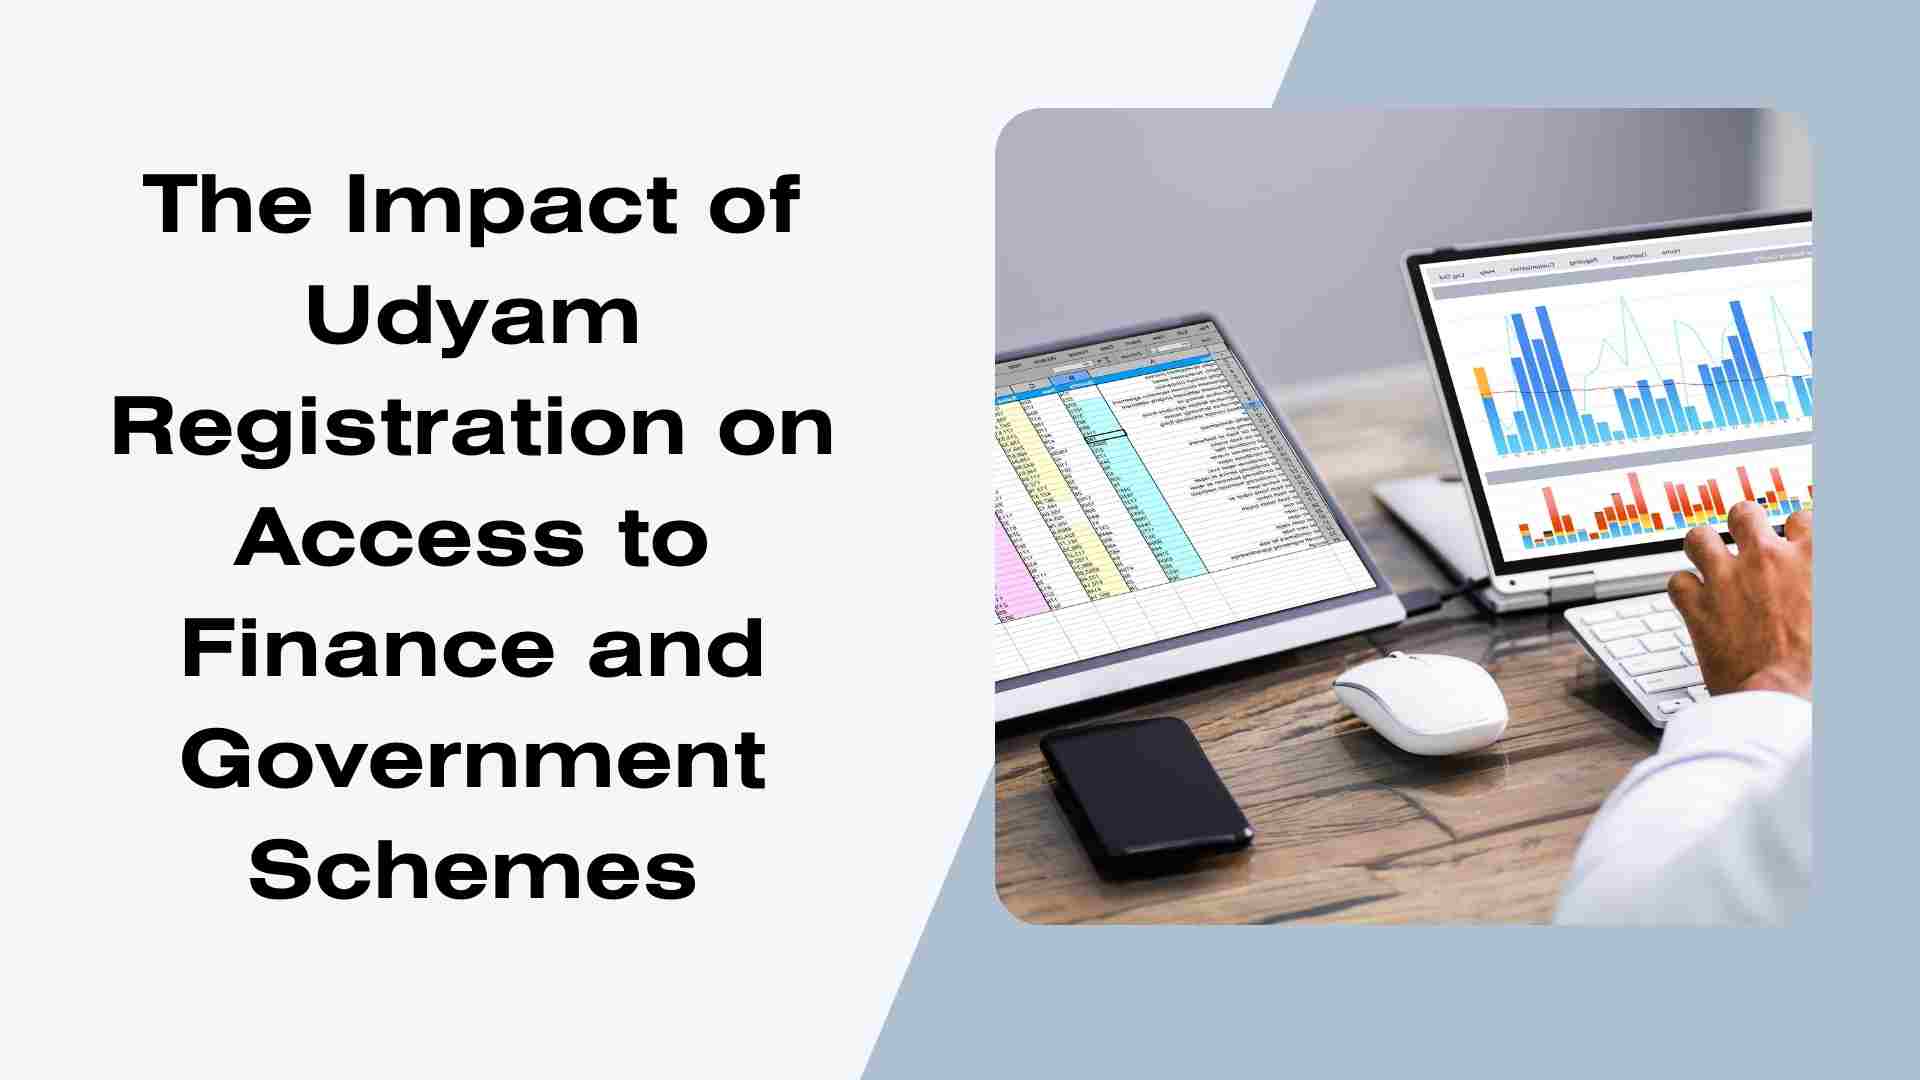 The Impact of Udyam Registration on Access to Finance and Government Schemes